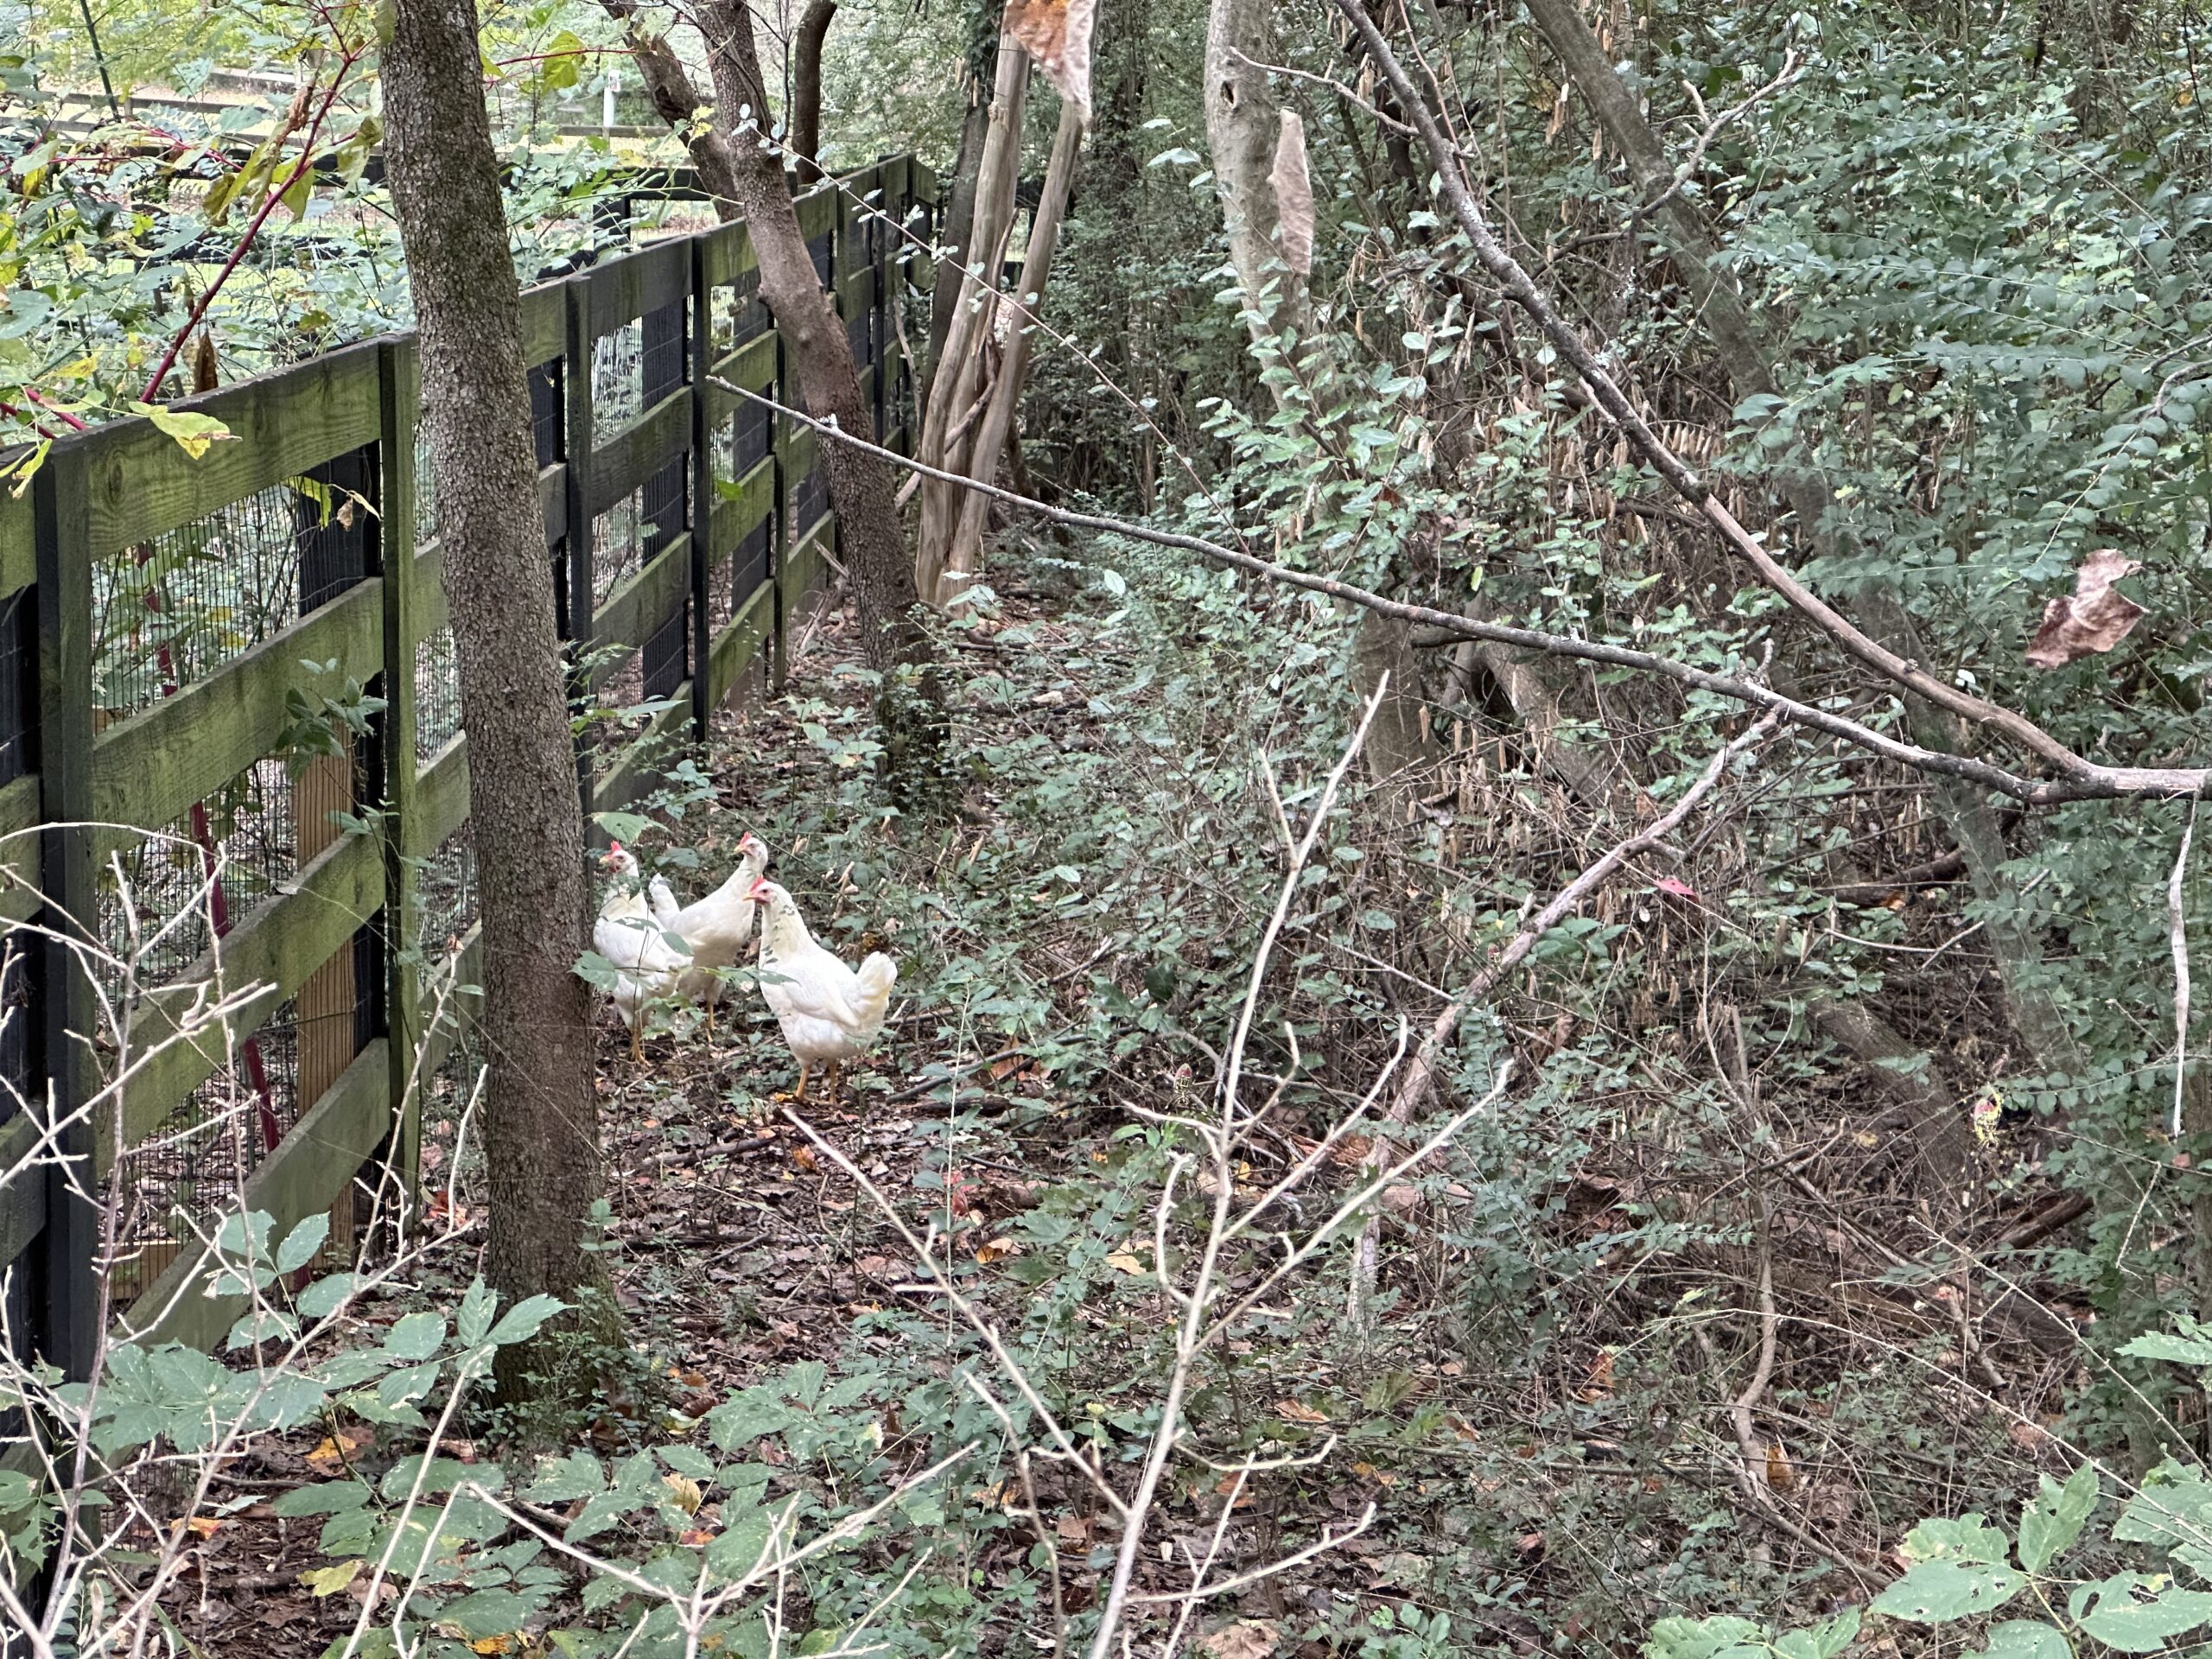 A group of Leghorns on the wrong side of our five foot perimeter fence.